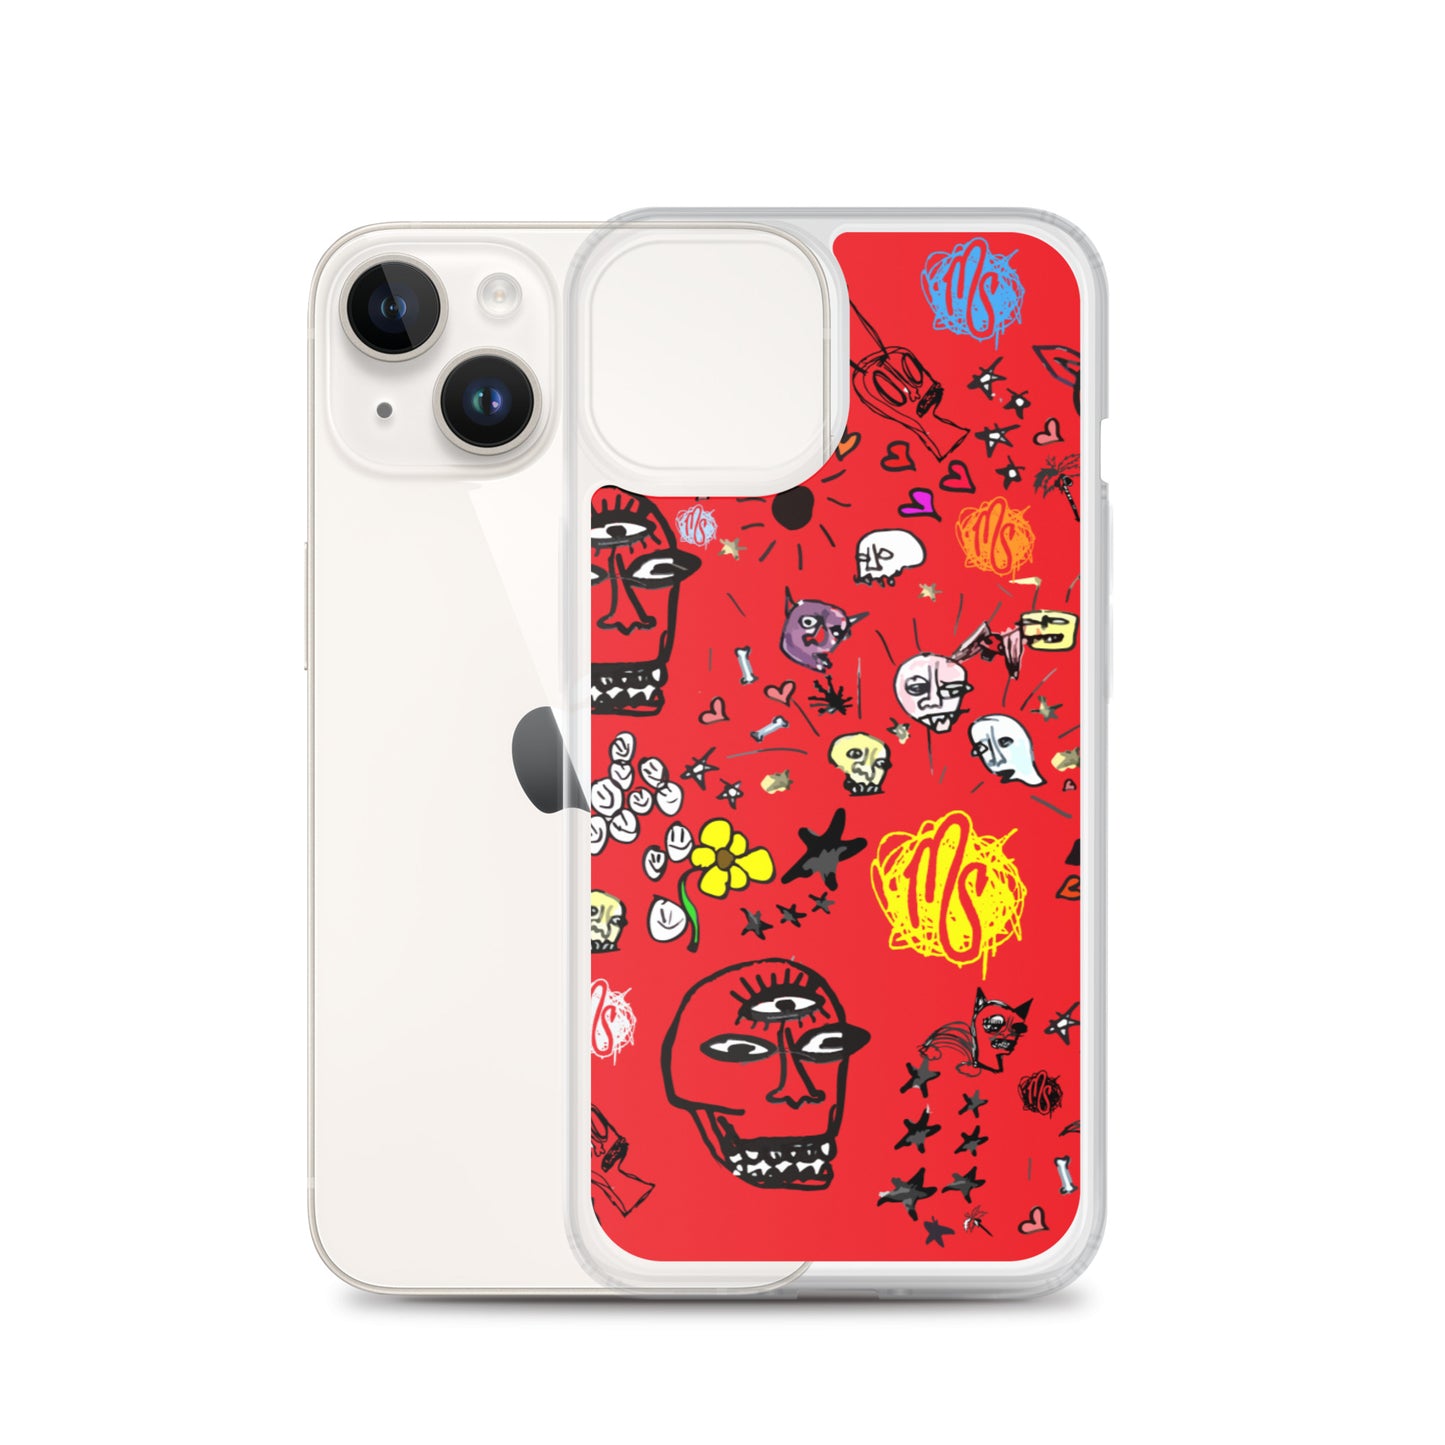 Art All Over Red iPhone Case